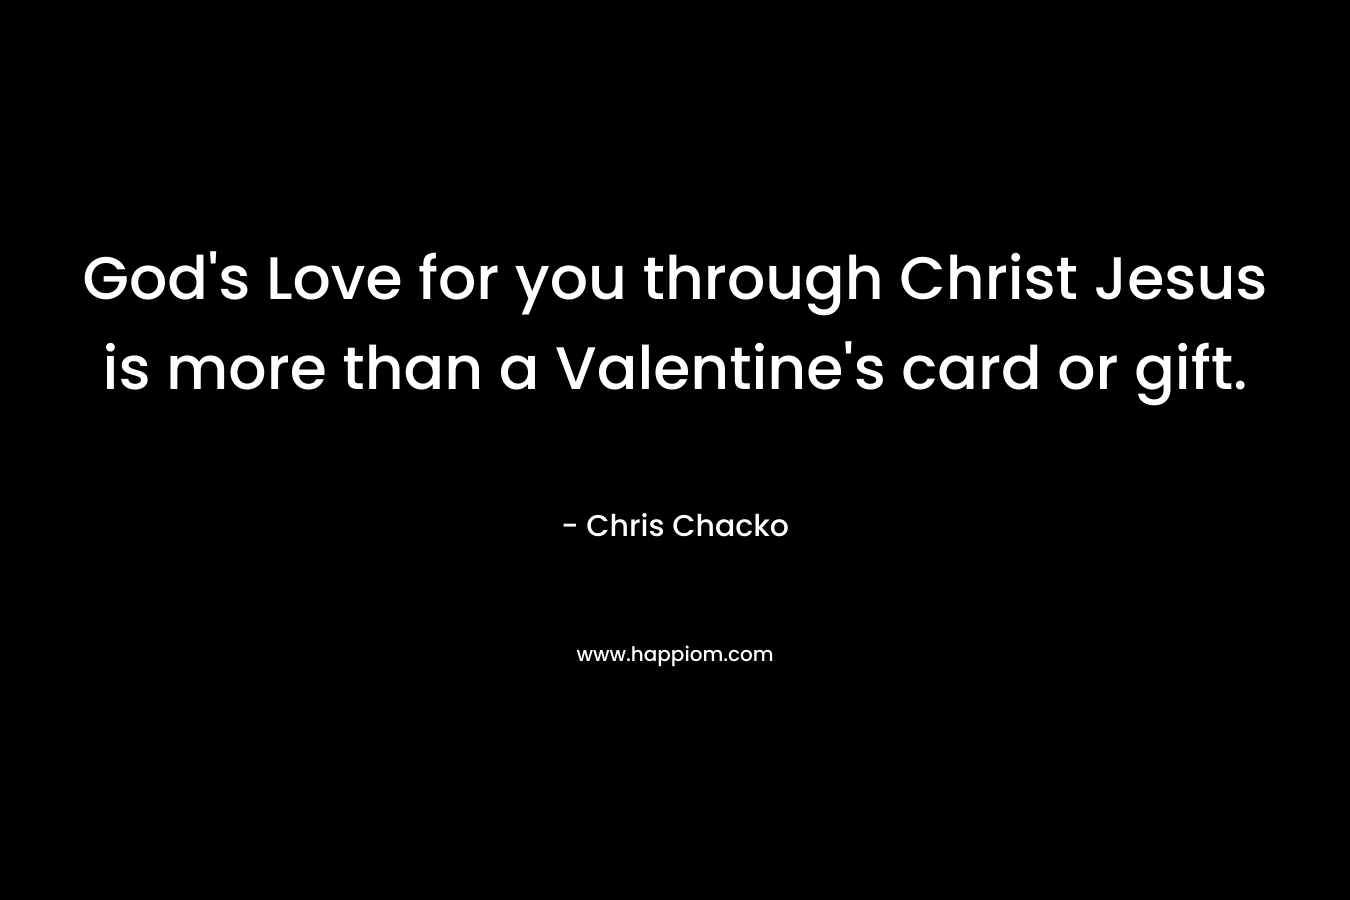 God's Love for you through Christ Jesus is more than a Valentine's card or gift.